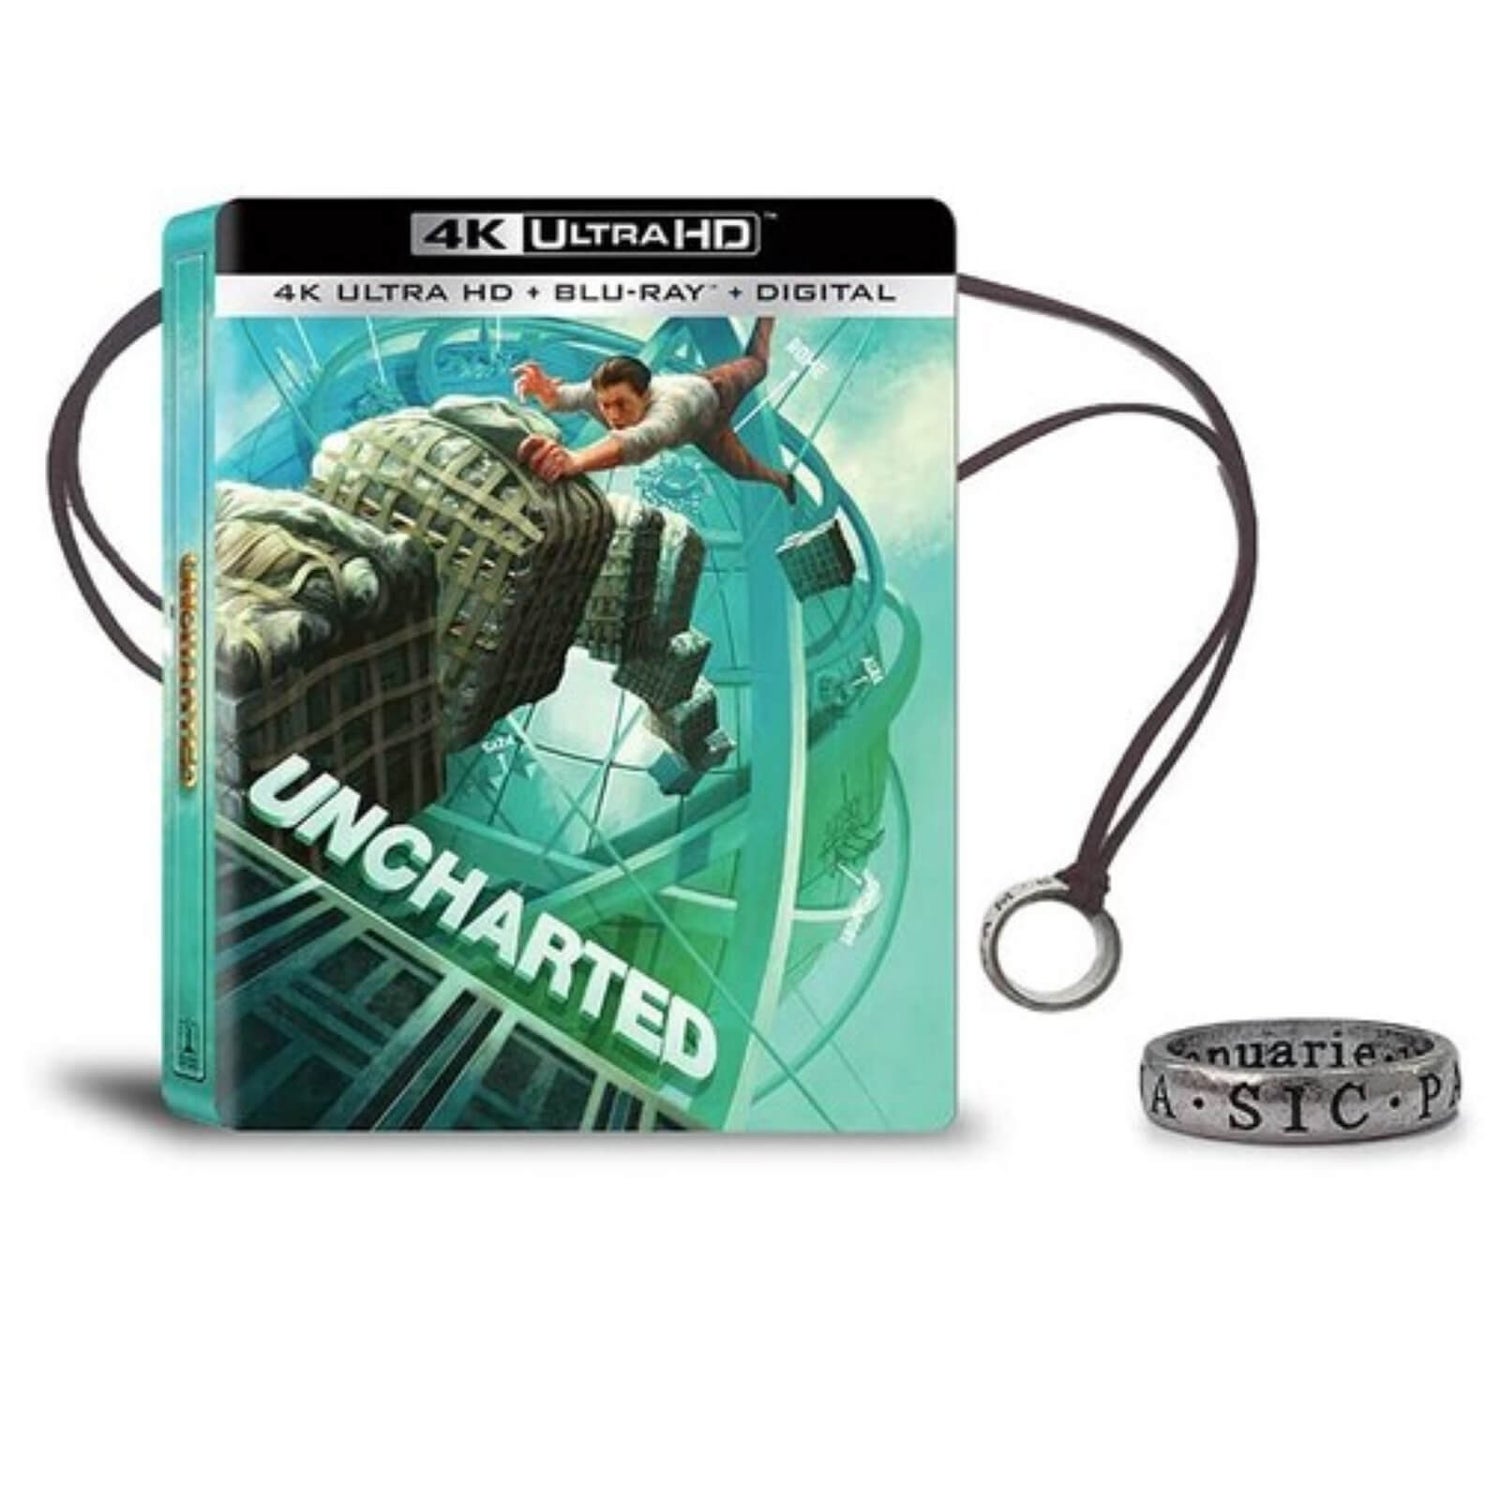 Uncharted - 4K Ultra HD Steelbook with Ring (US Import)